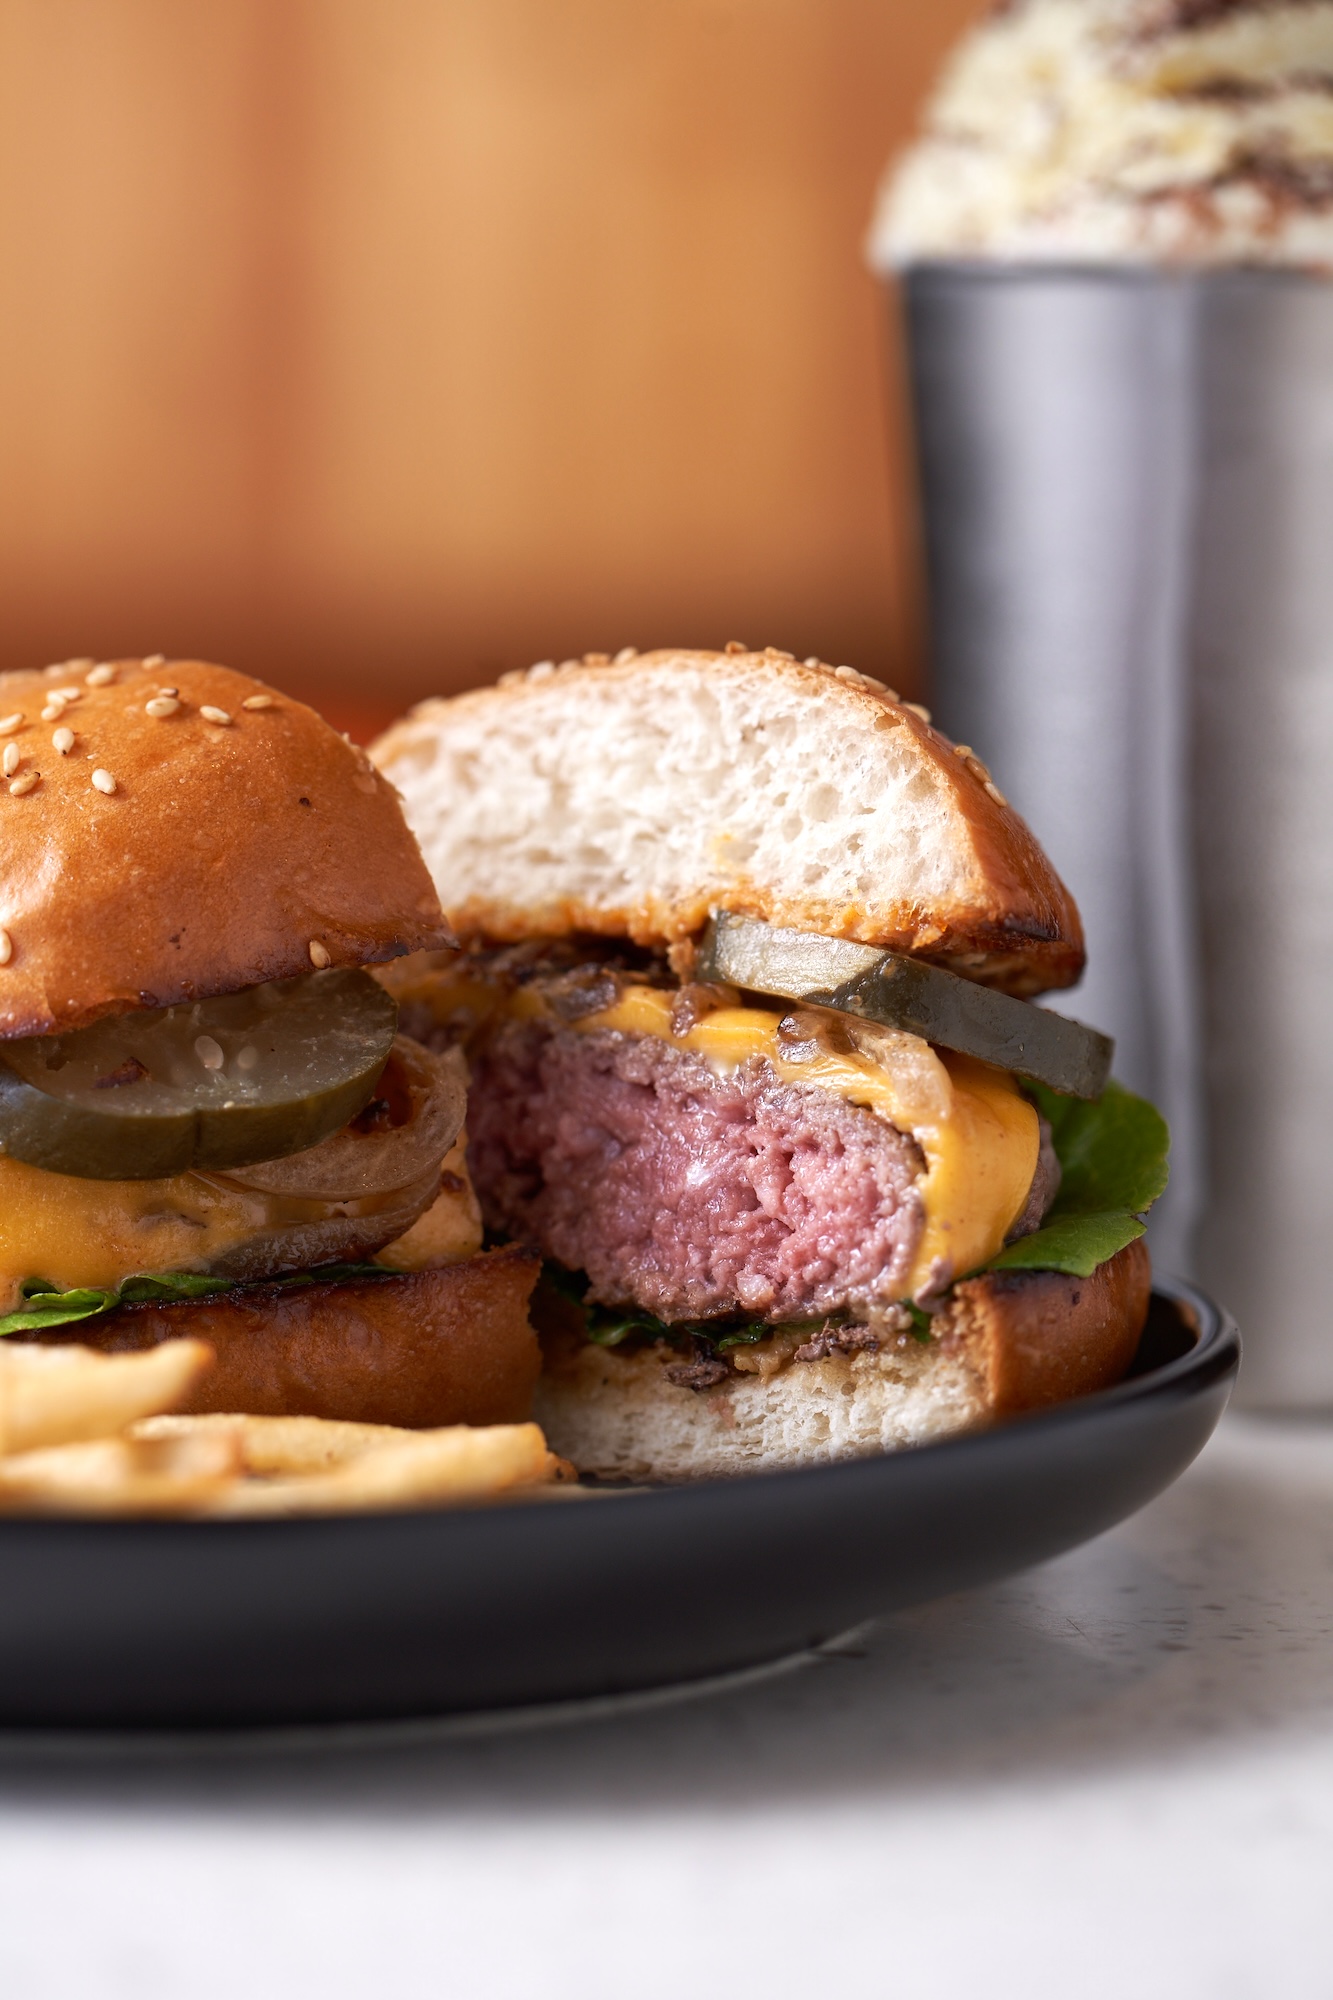 The Elephant Grounds Cheeseburger uses a ratio of 70 percent top sirloin and 30 percent beef short plate